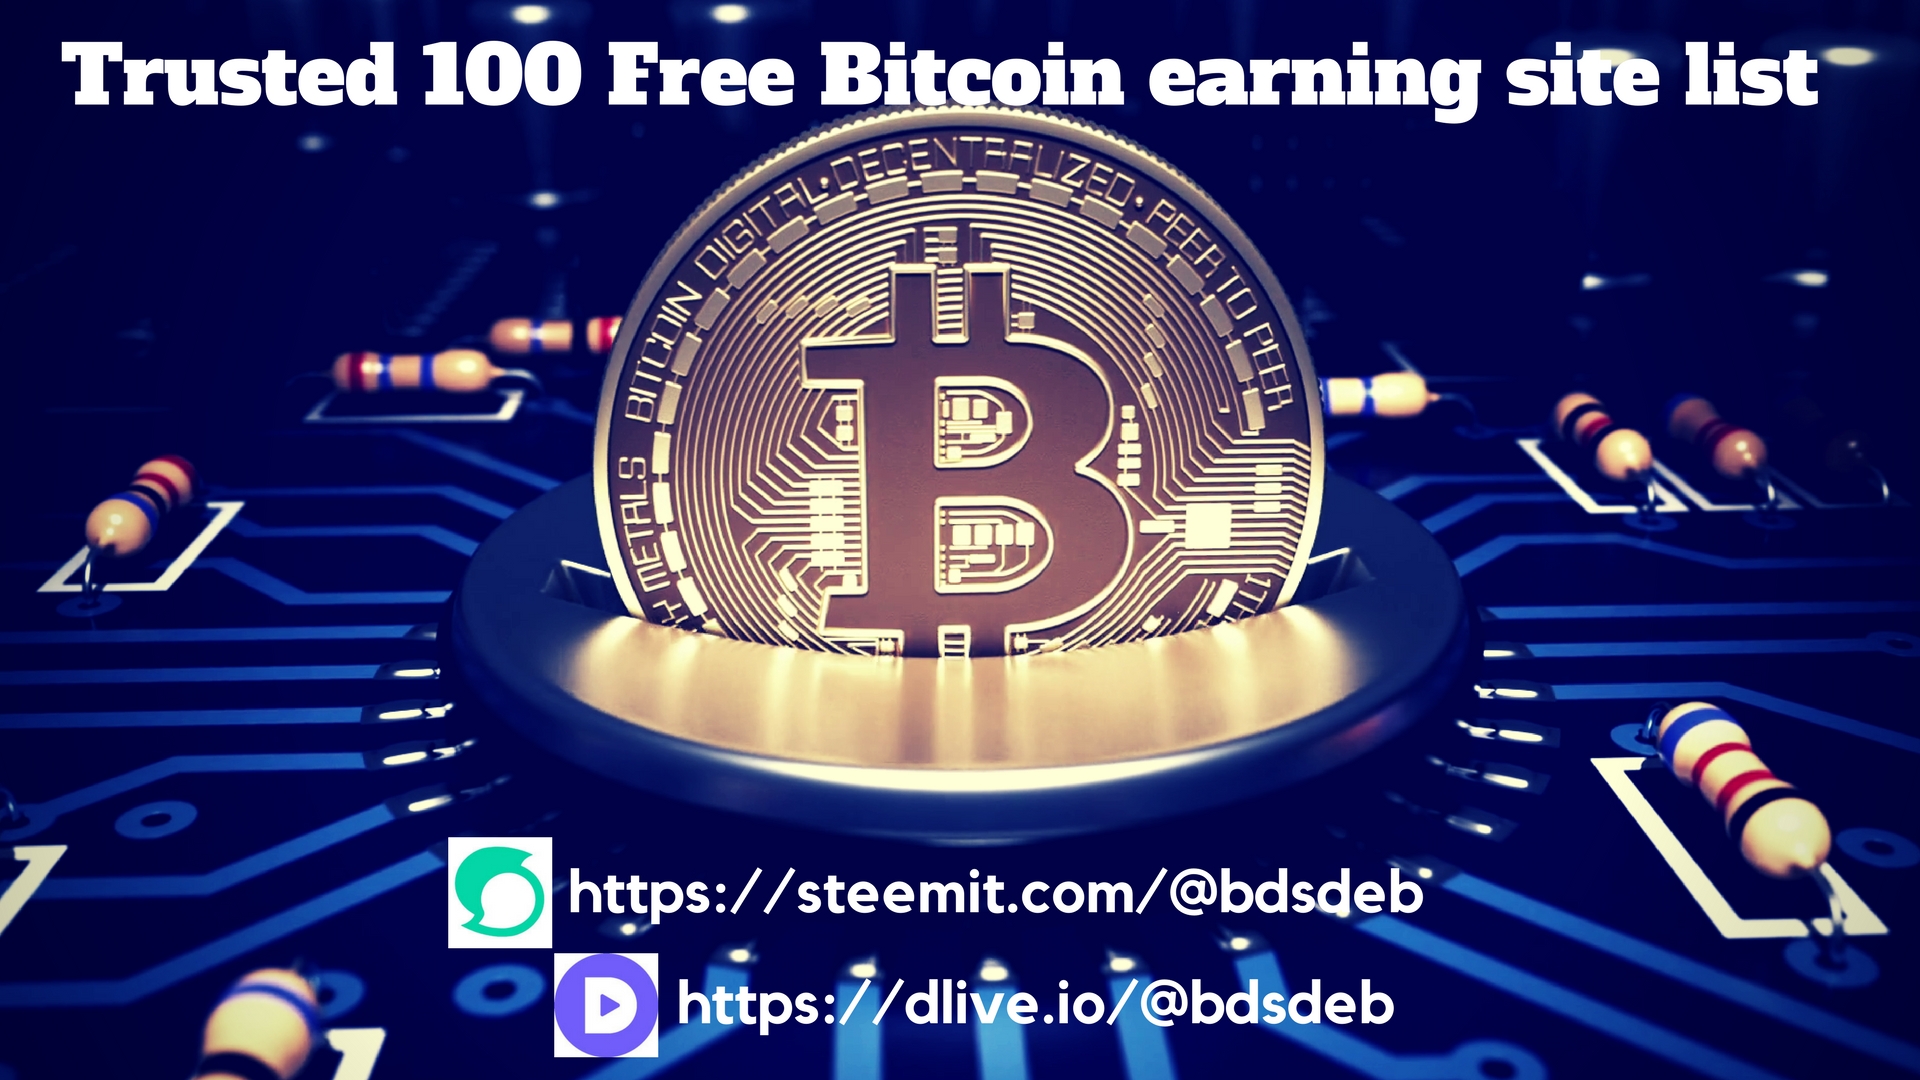 Best Trusted Real Paying Free Bitcoin Sites List Steemit - 